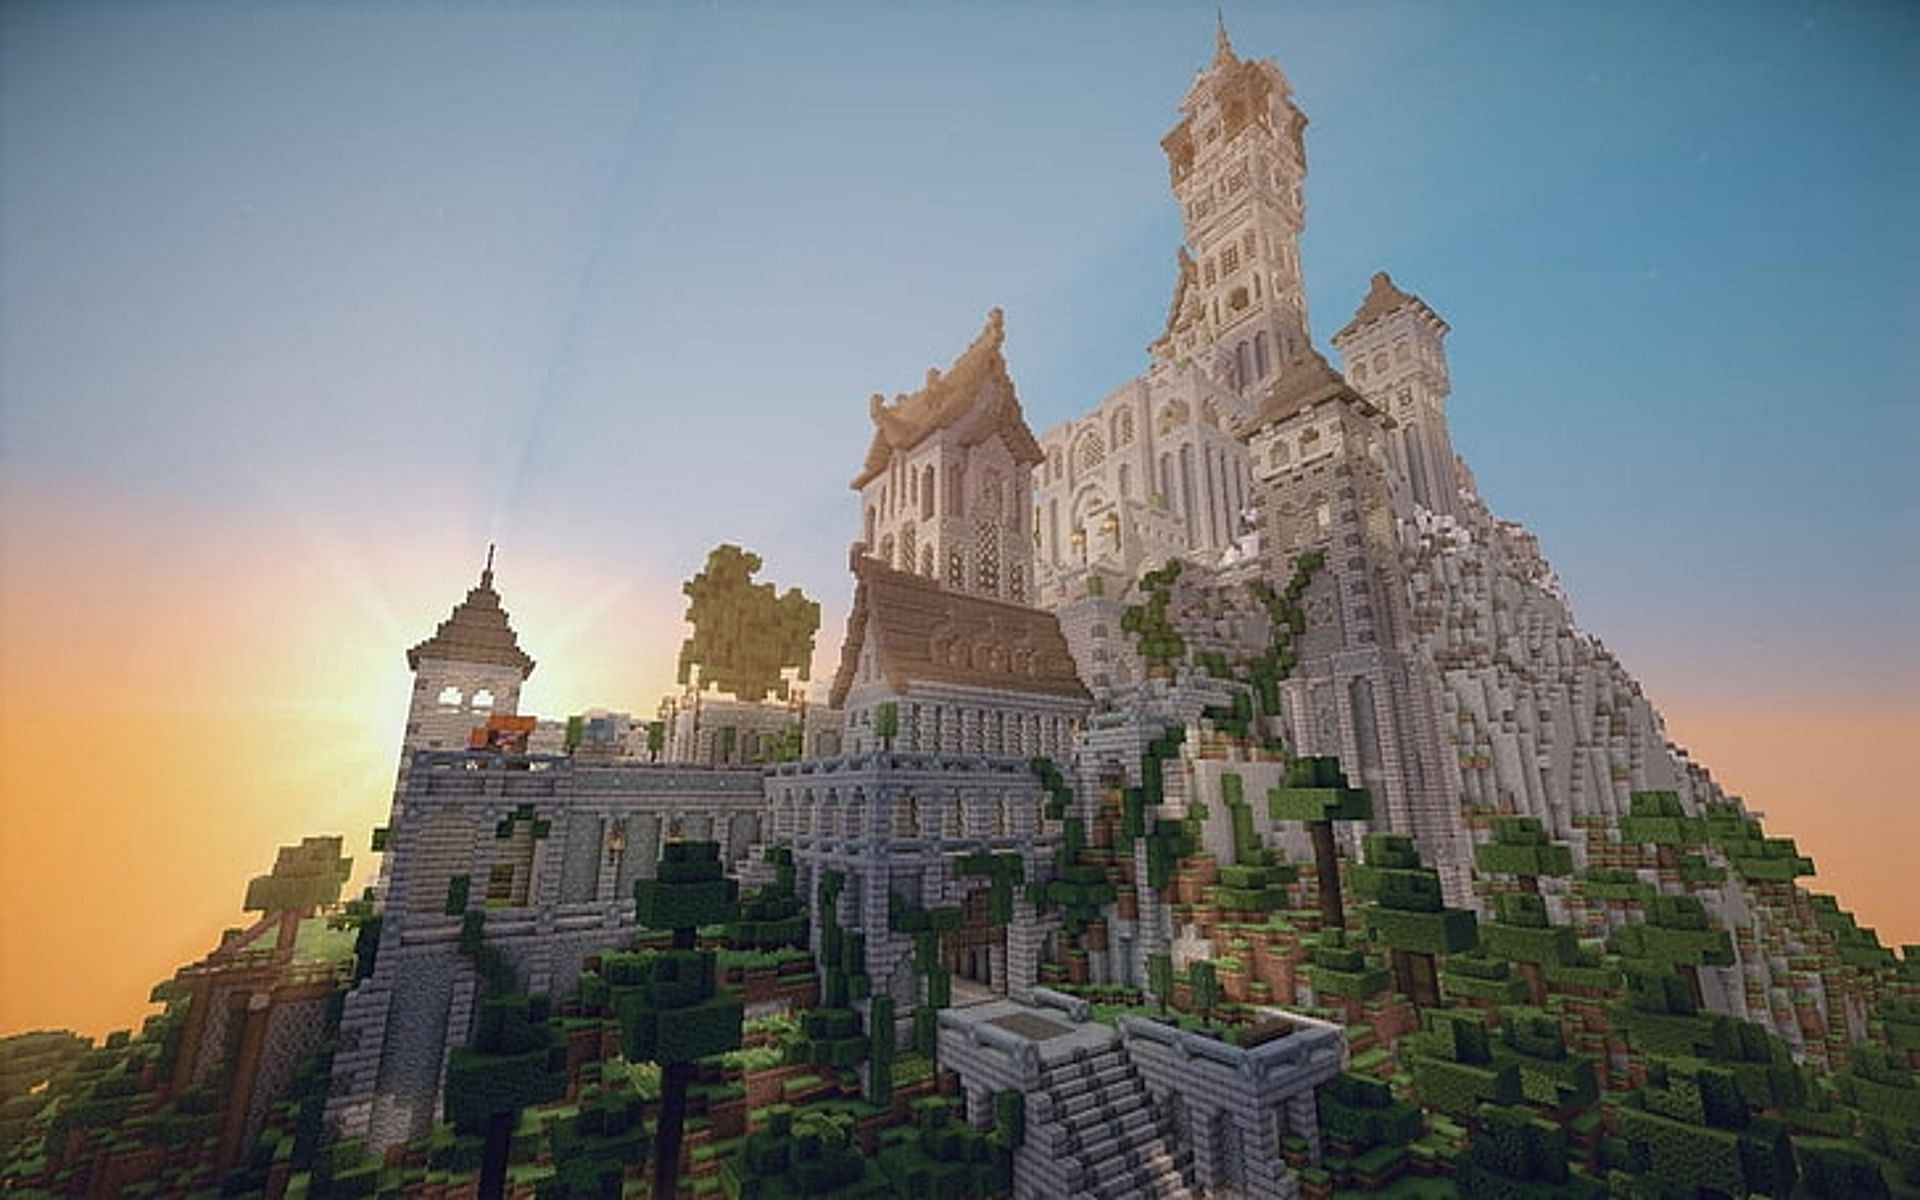 Castles are just one thing for players to build in-game (Image via Minecraft)